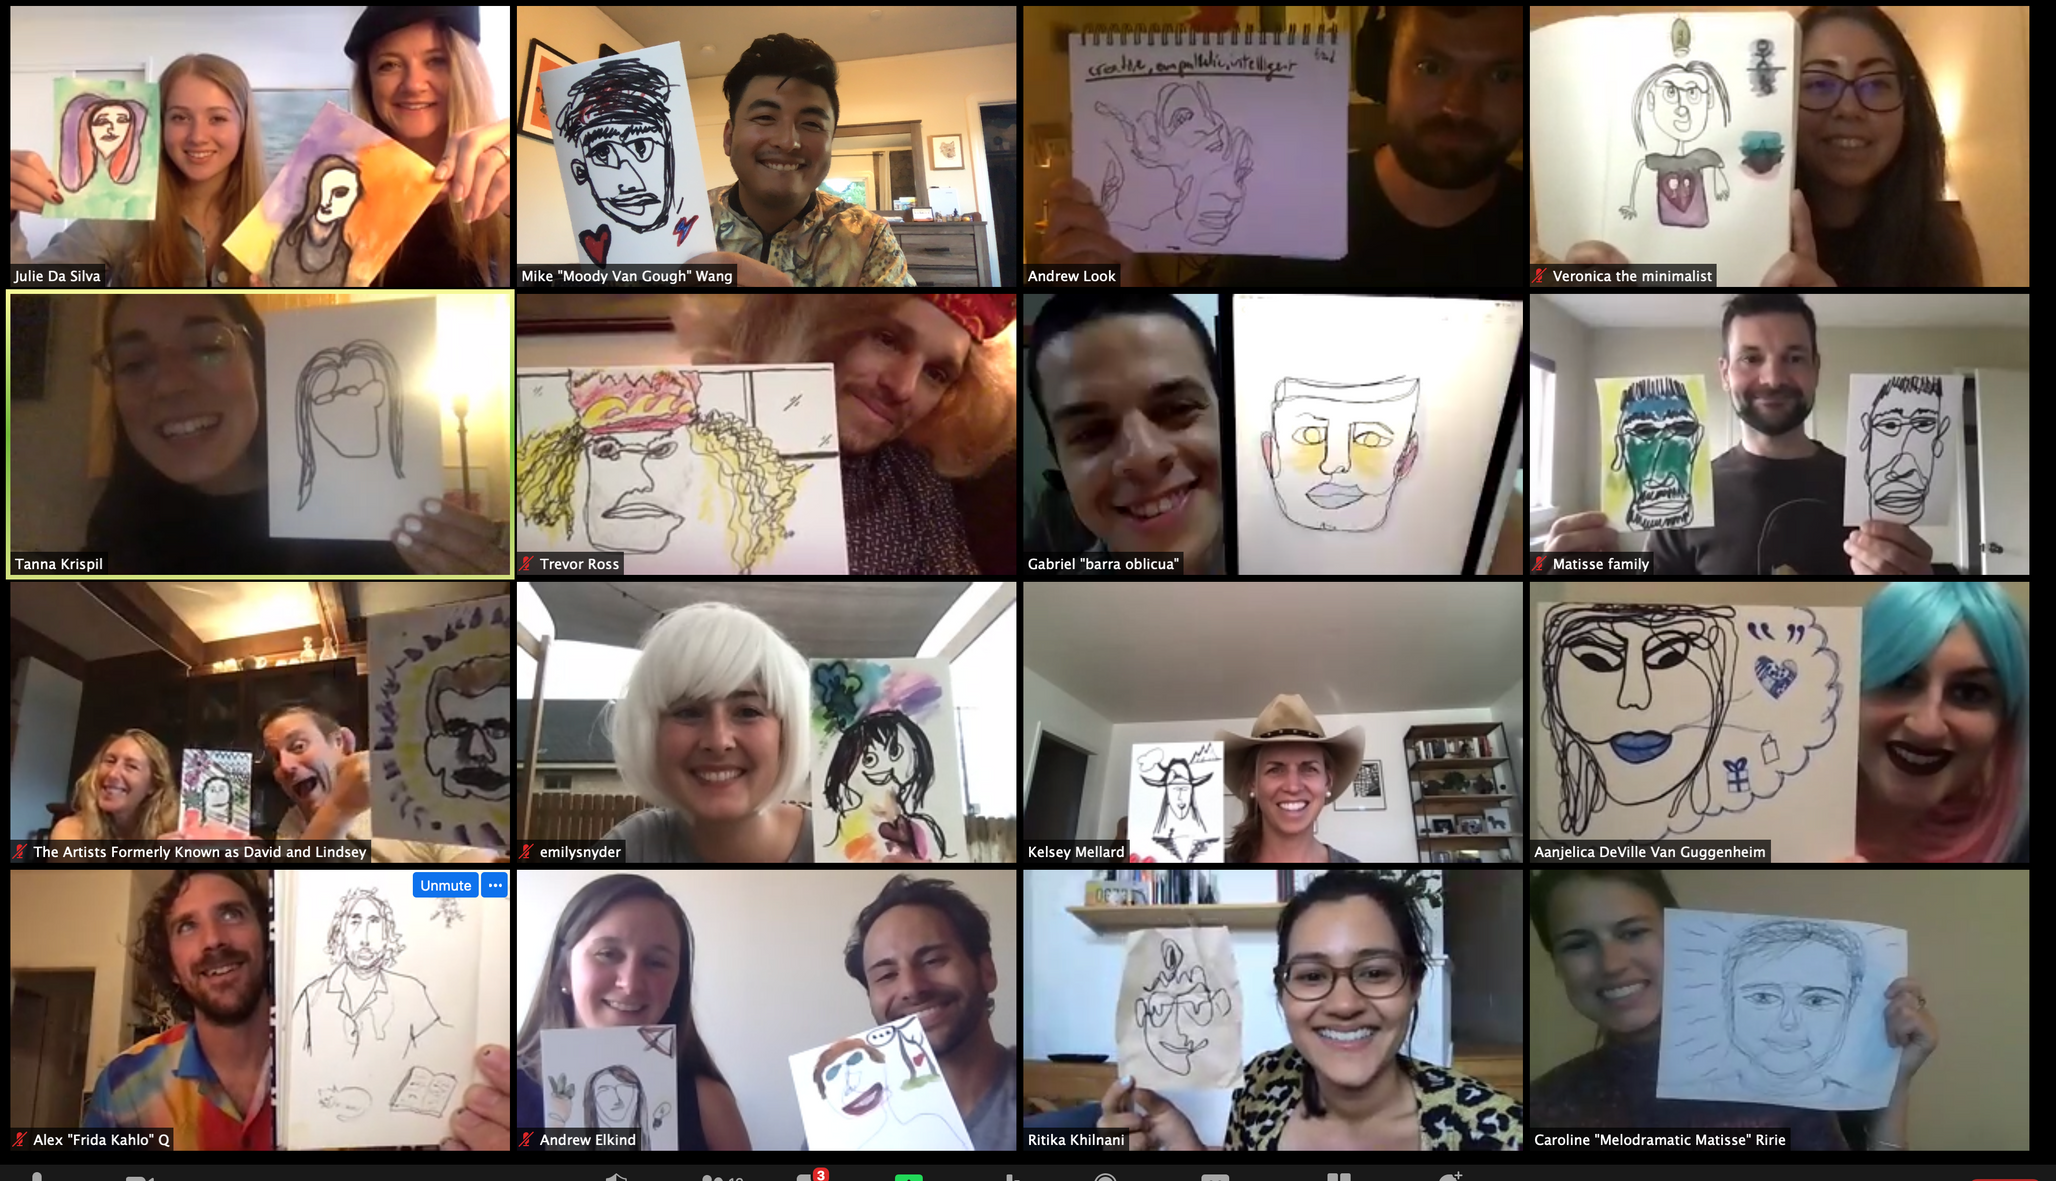 At one of the team happy hours, an artist taught the Sitka team how to create one-line drawings as self portraits